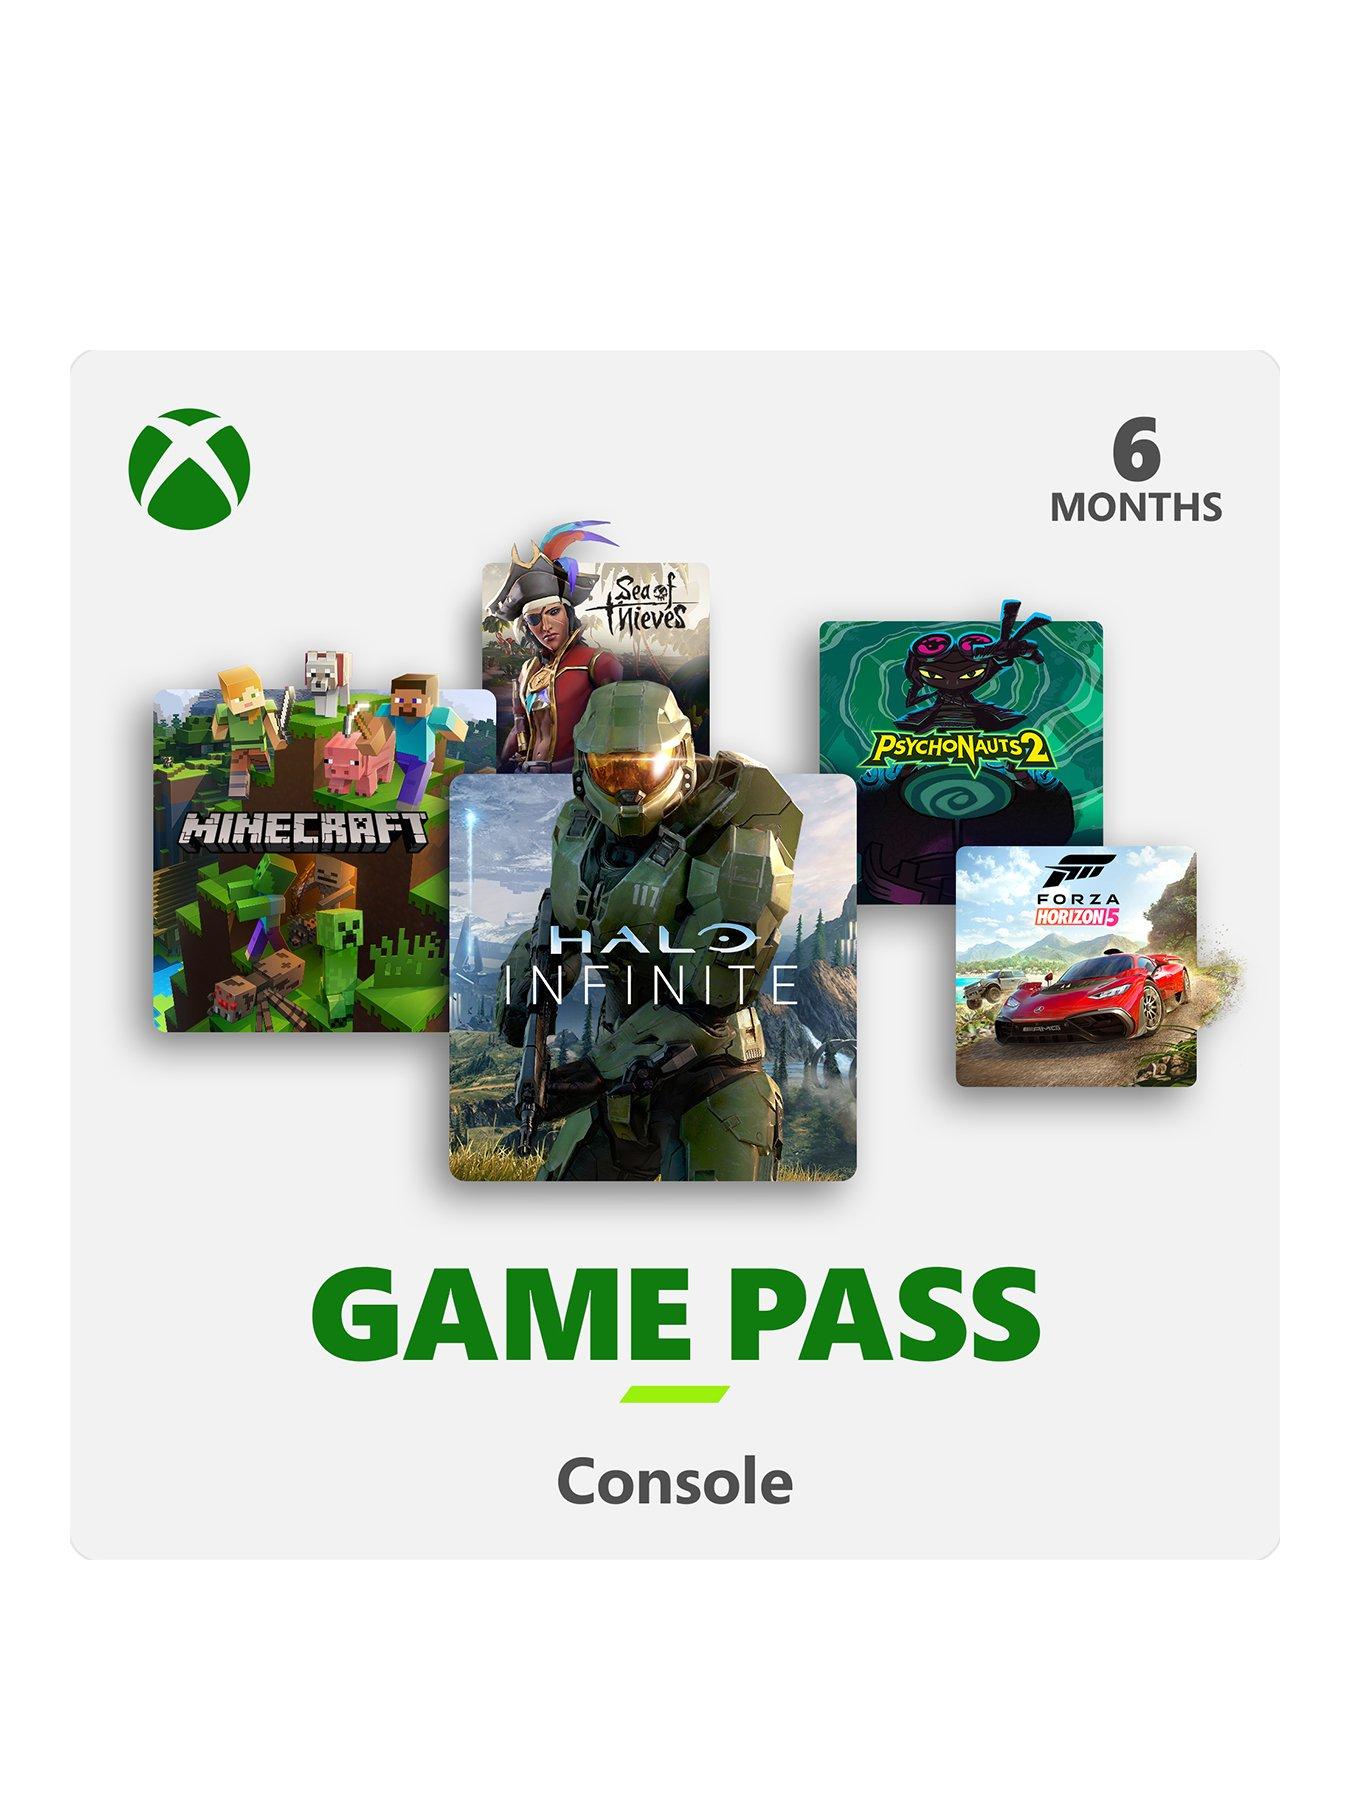 Xbox Gift Card UK Edition 15£ Game Pass Collection 3 Month (Without Credit)